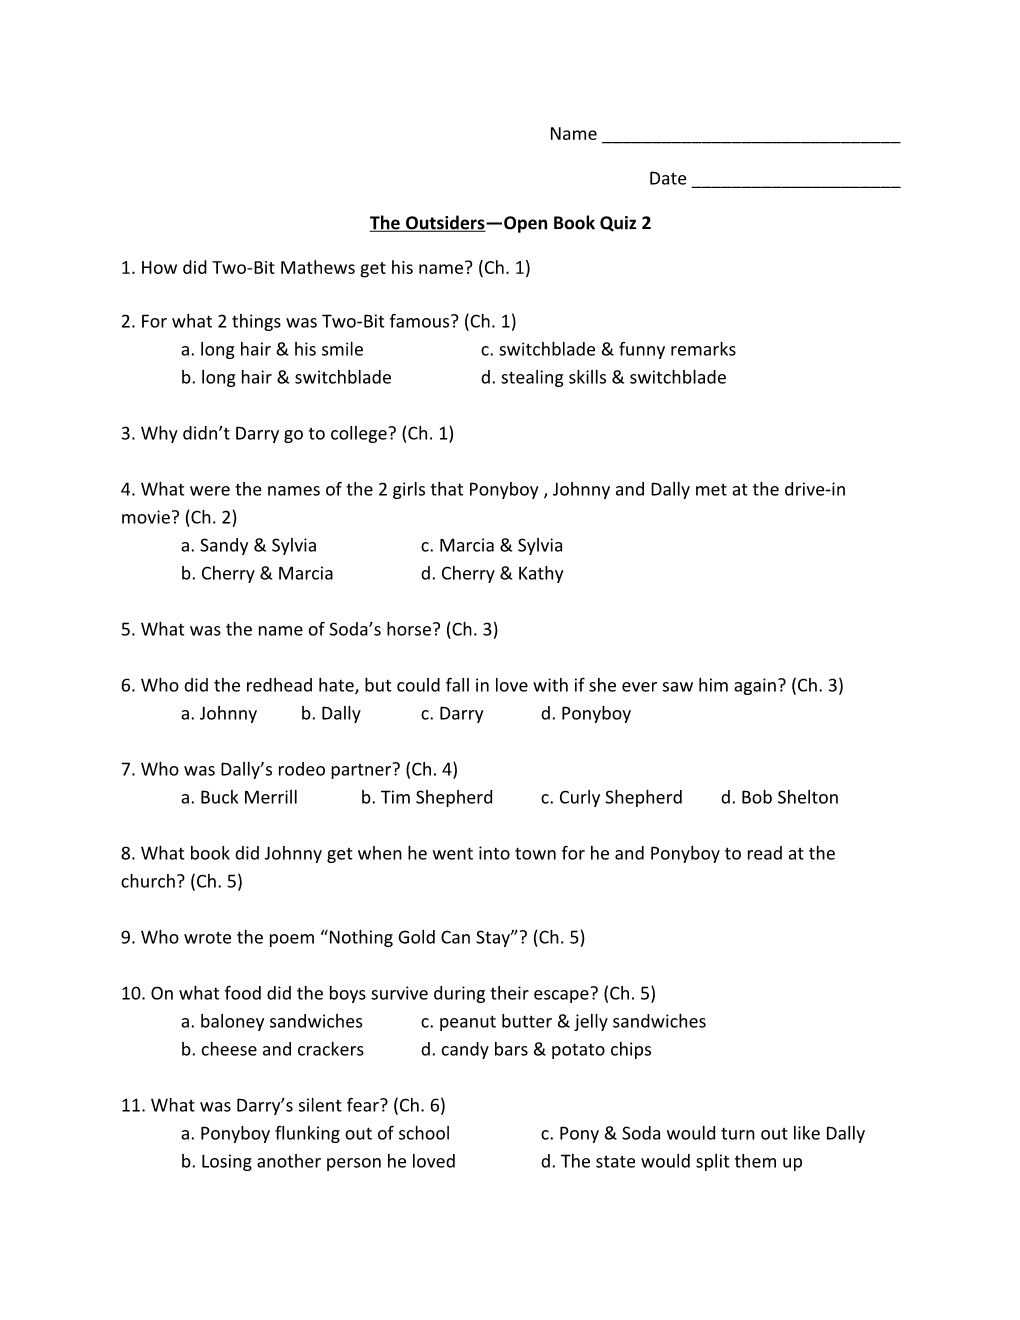 The Outsiders Open Book Quiz 2